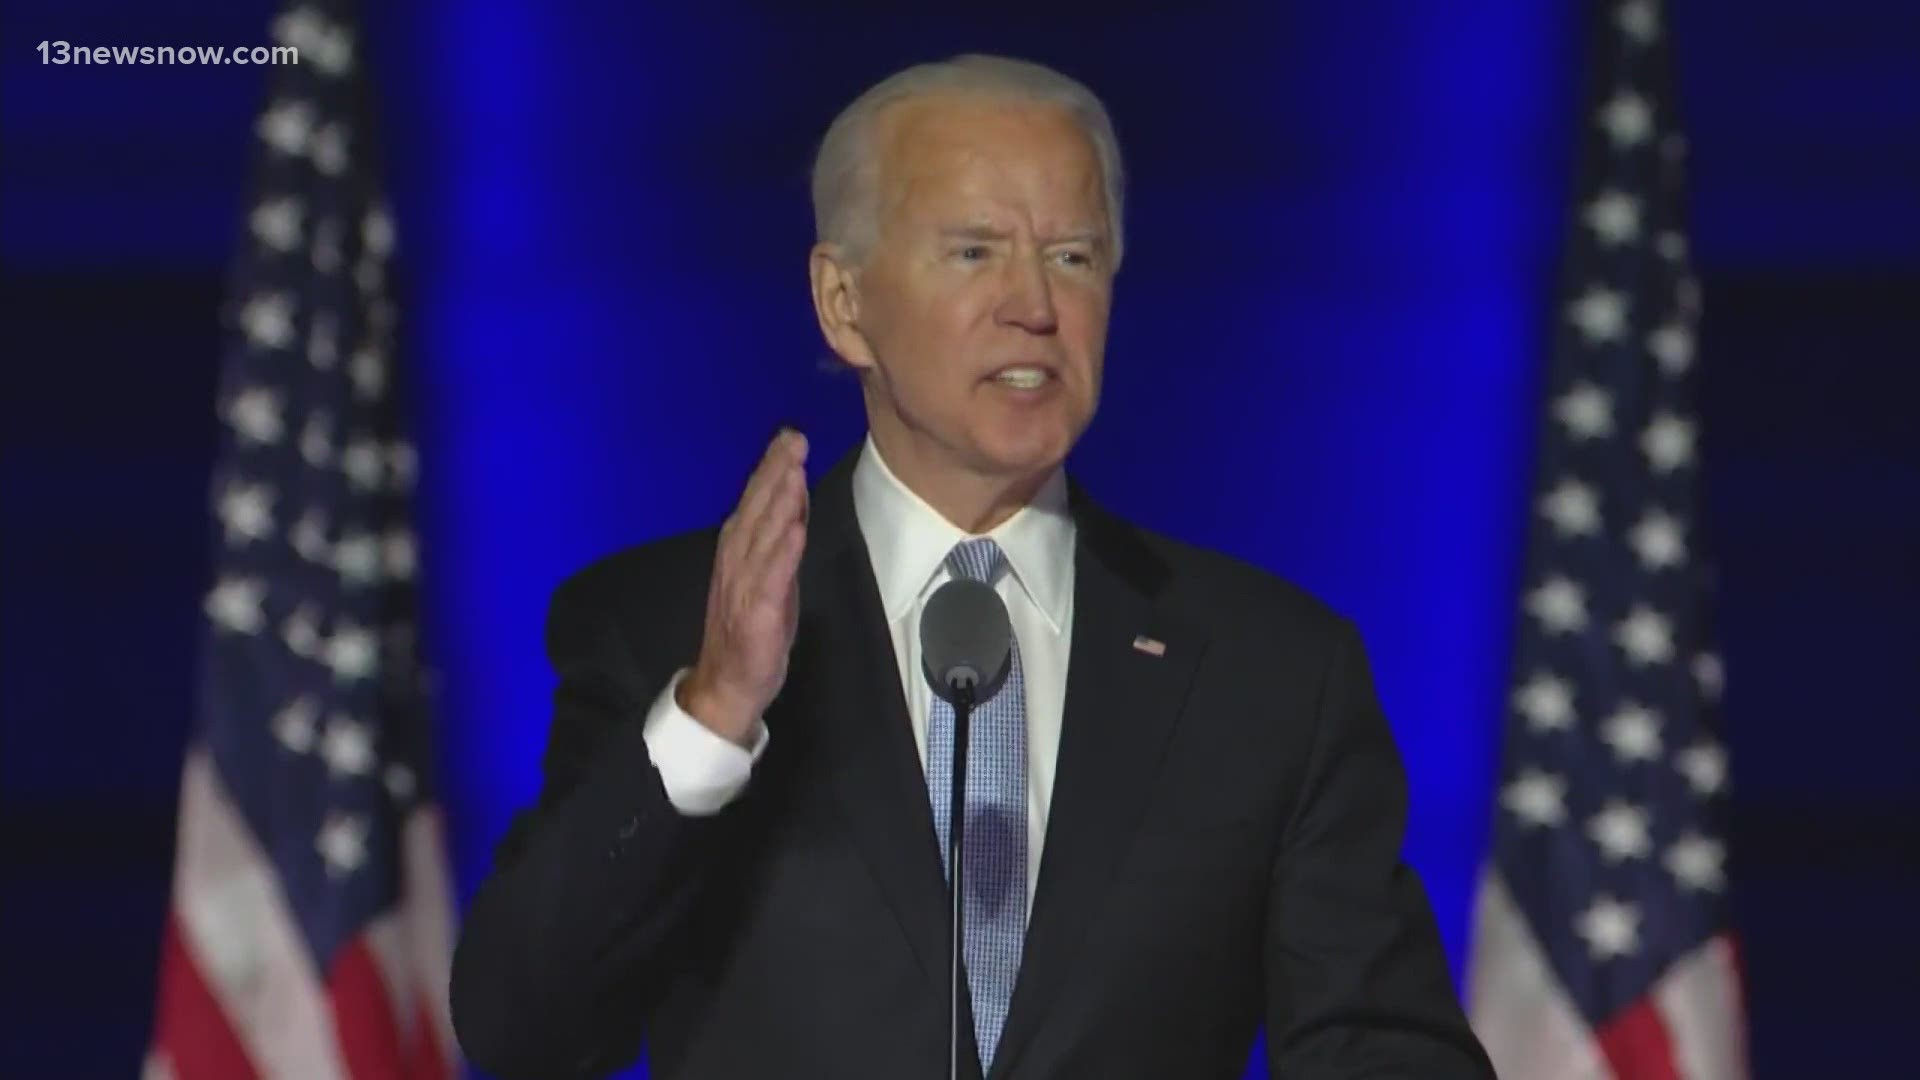 Despite President-elect Joe Biden winning the 2020 presidential election, President Trump has refused to concede. 13News Now Dana Smith got some insight on why.